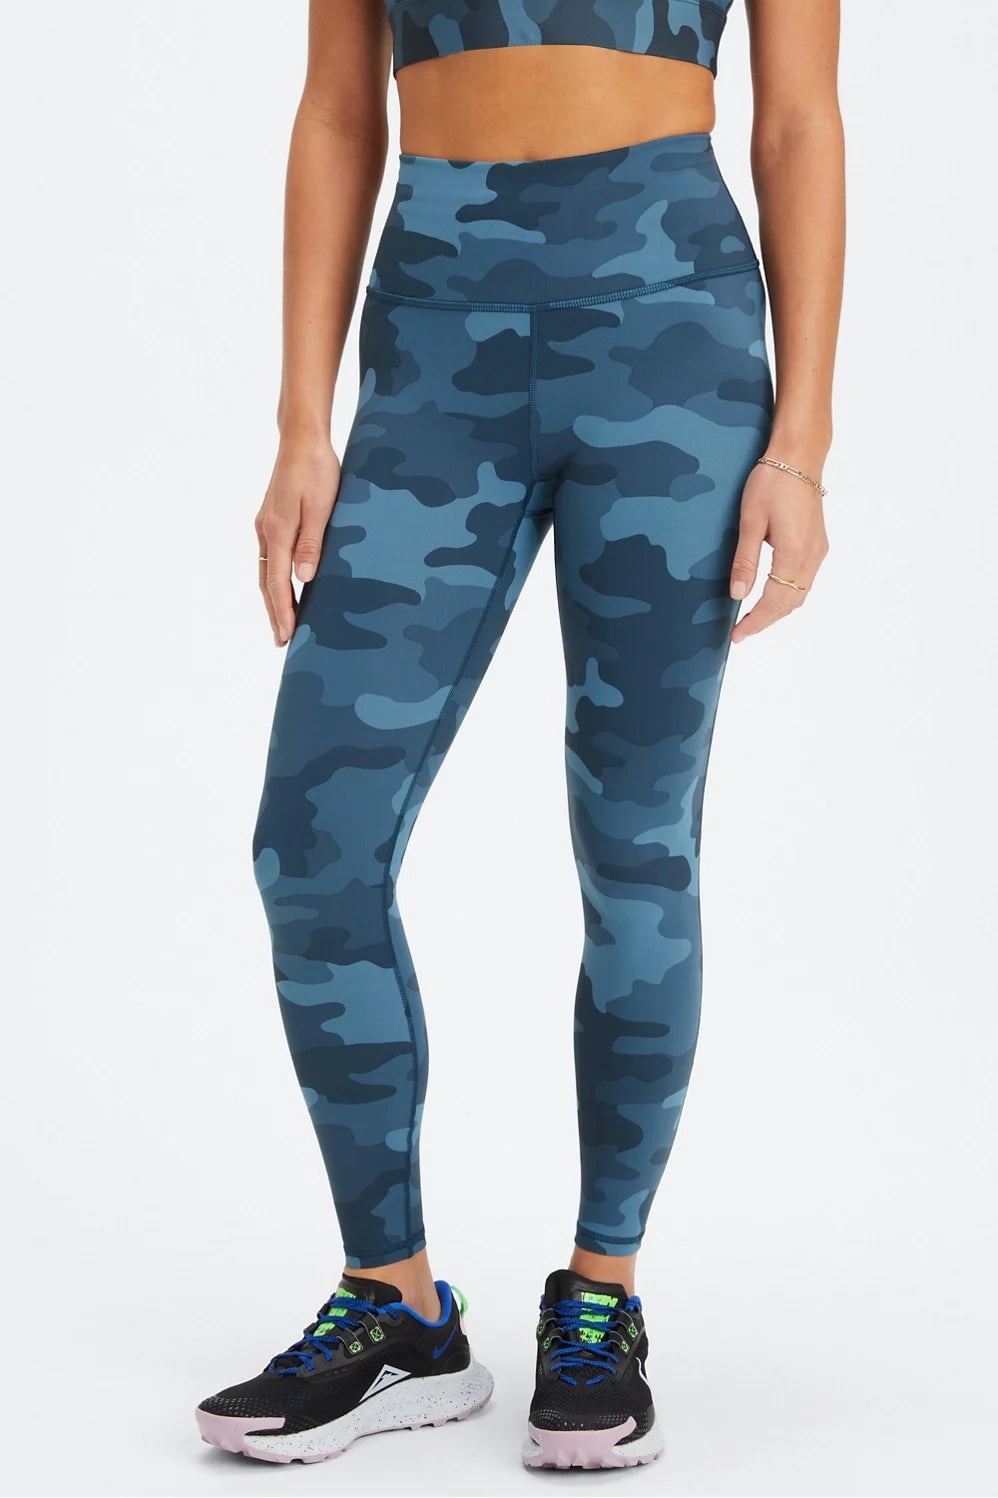 Fabletics Define PowerHold® High-Waisted 7/8 Legging Size Small: S/Blue 